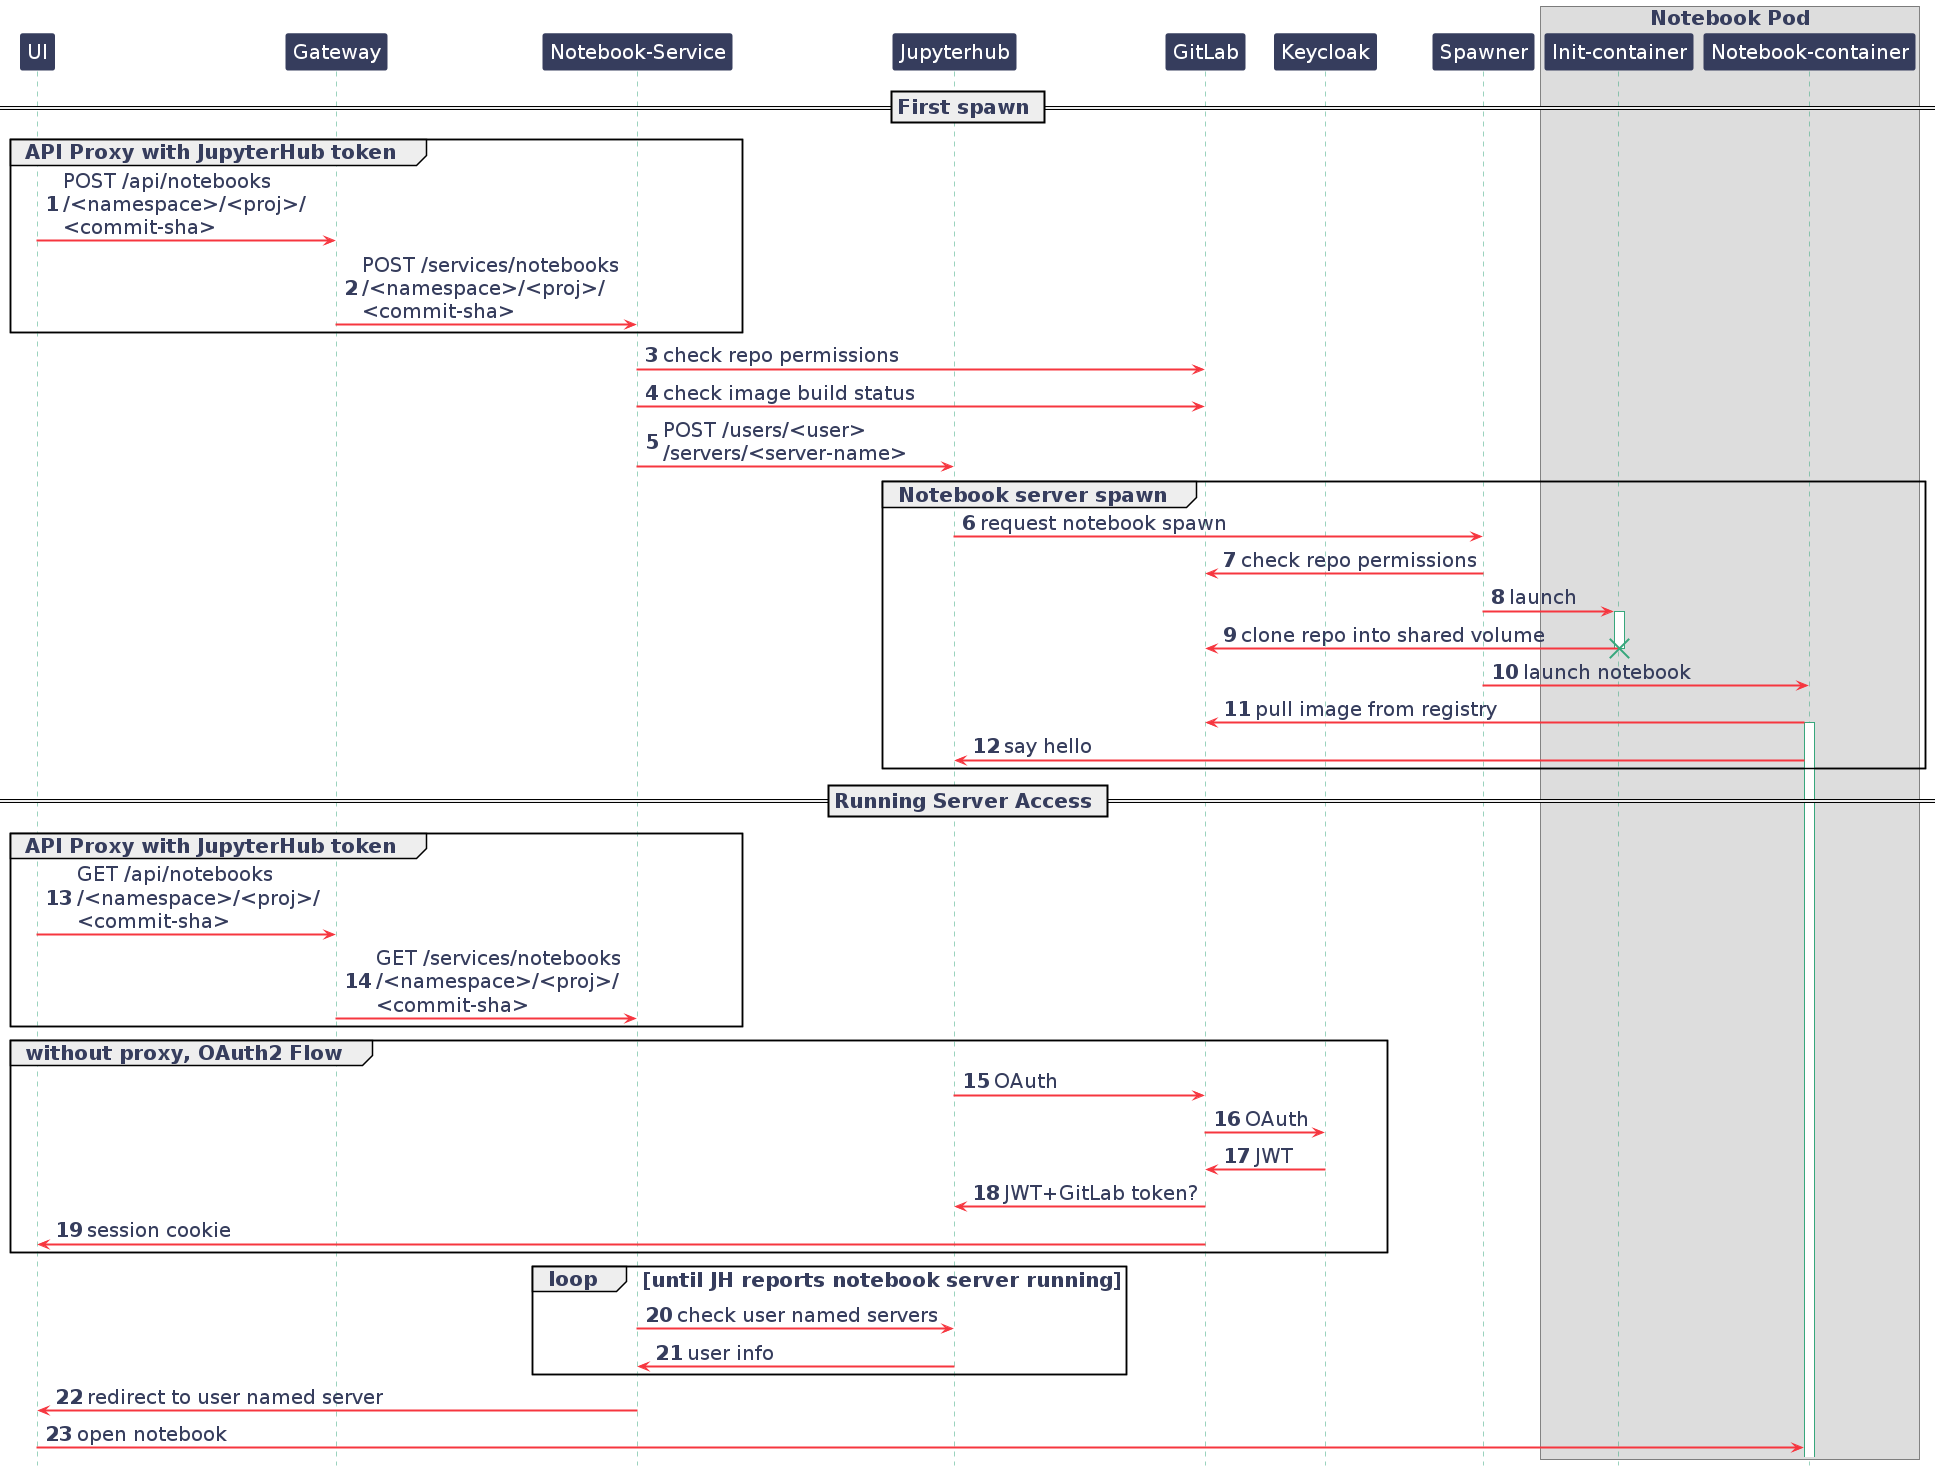 Sequence diagram of notebook launch from the UI via the Notebooks Service.